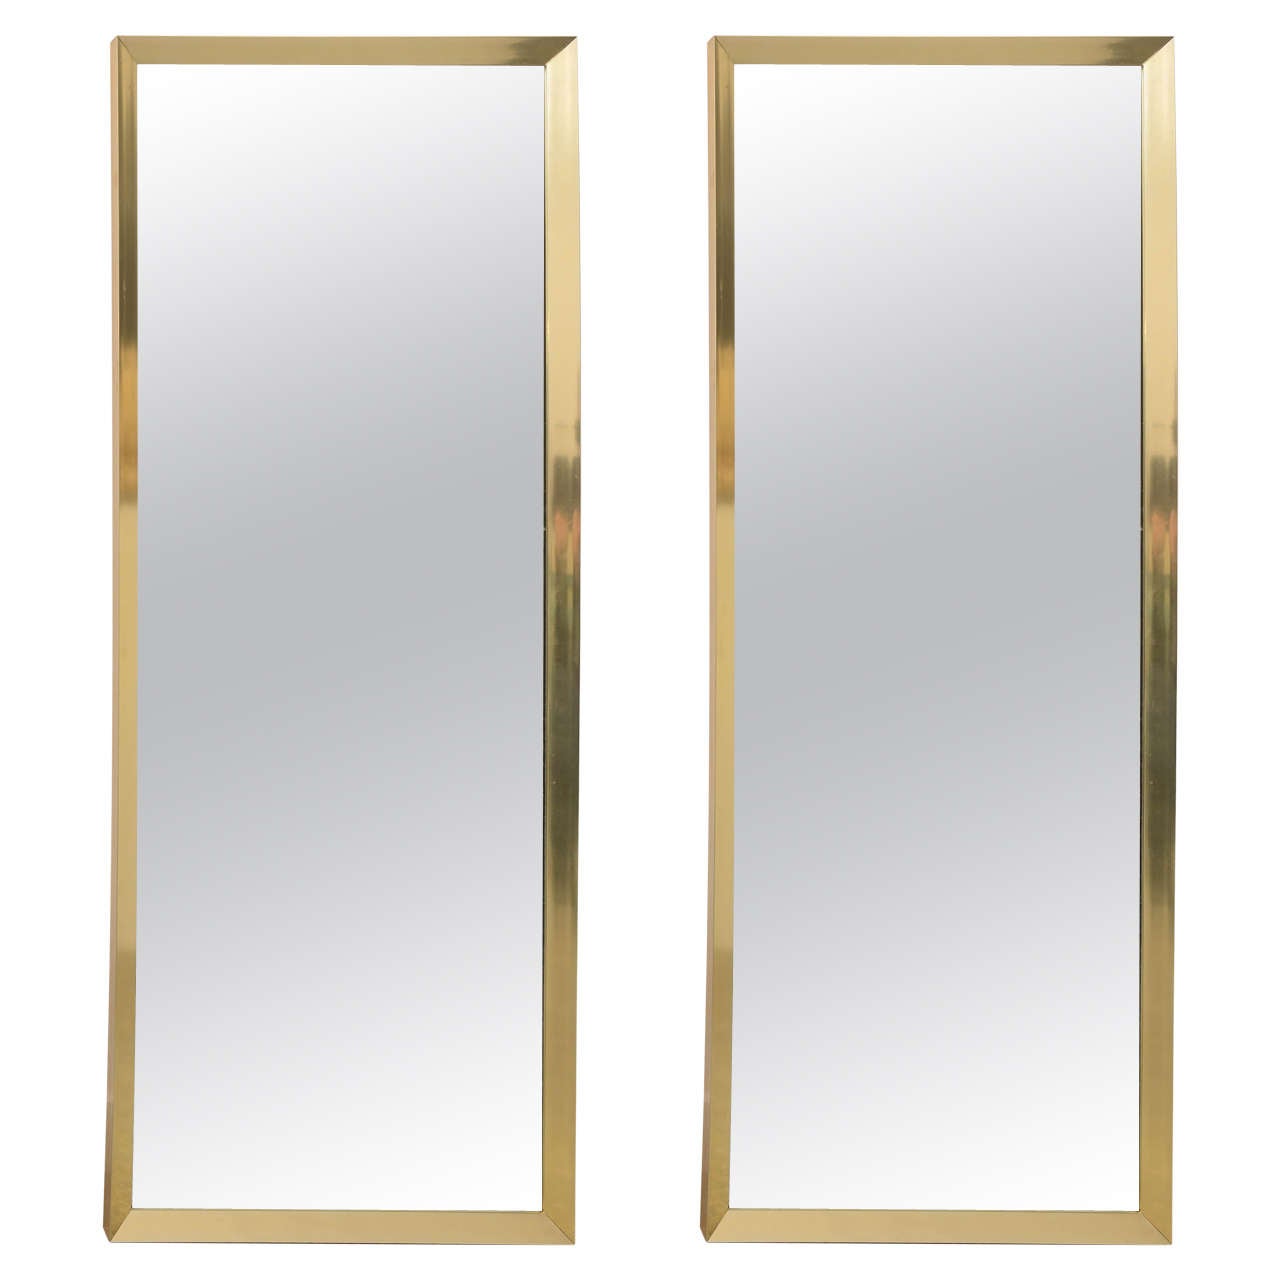 Pair of Mid-Century Polished Brass Framed Mirrors Attributed to Paul McCobb